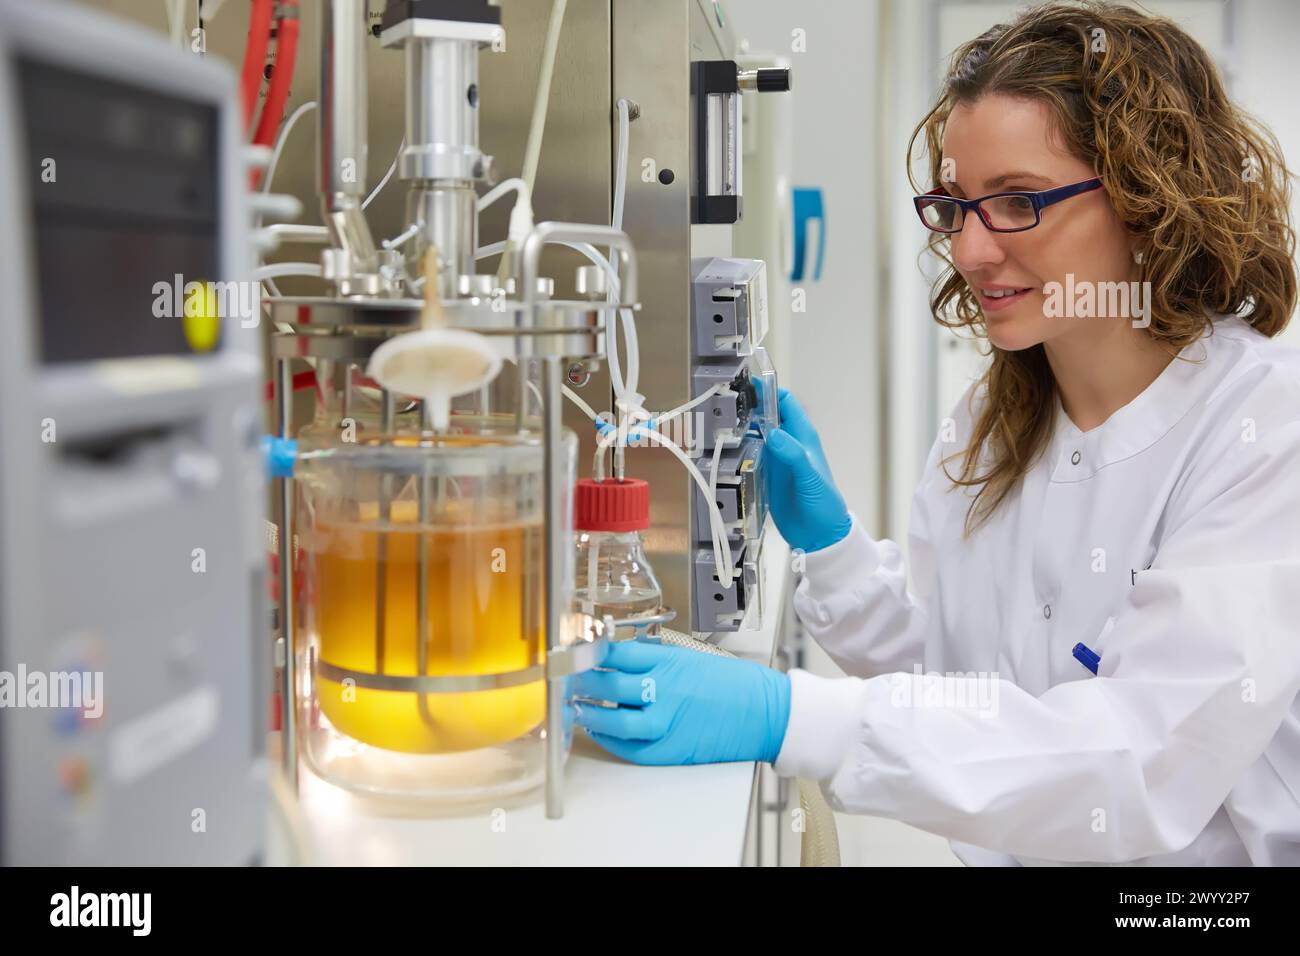 BIOSTAT fermenter. Bioprocess Laboratory. Energy and Environment Division. Tecnalia Research and Innovation. Miñano. Alava. Basque Country. Spain. Europe. Stock Photo